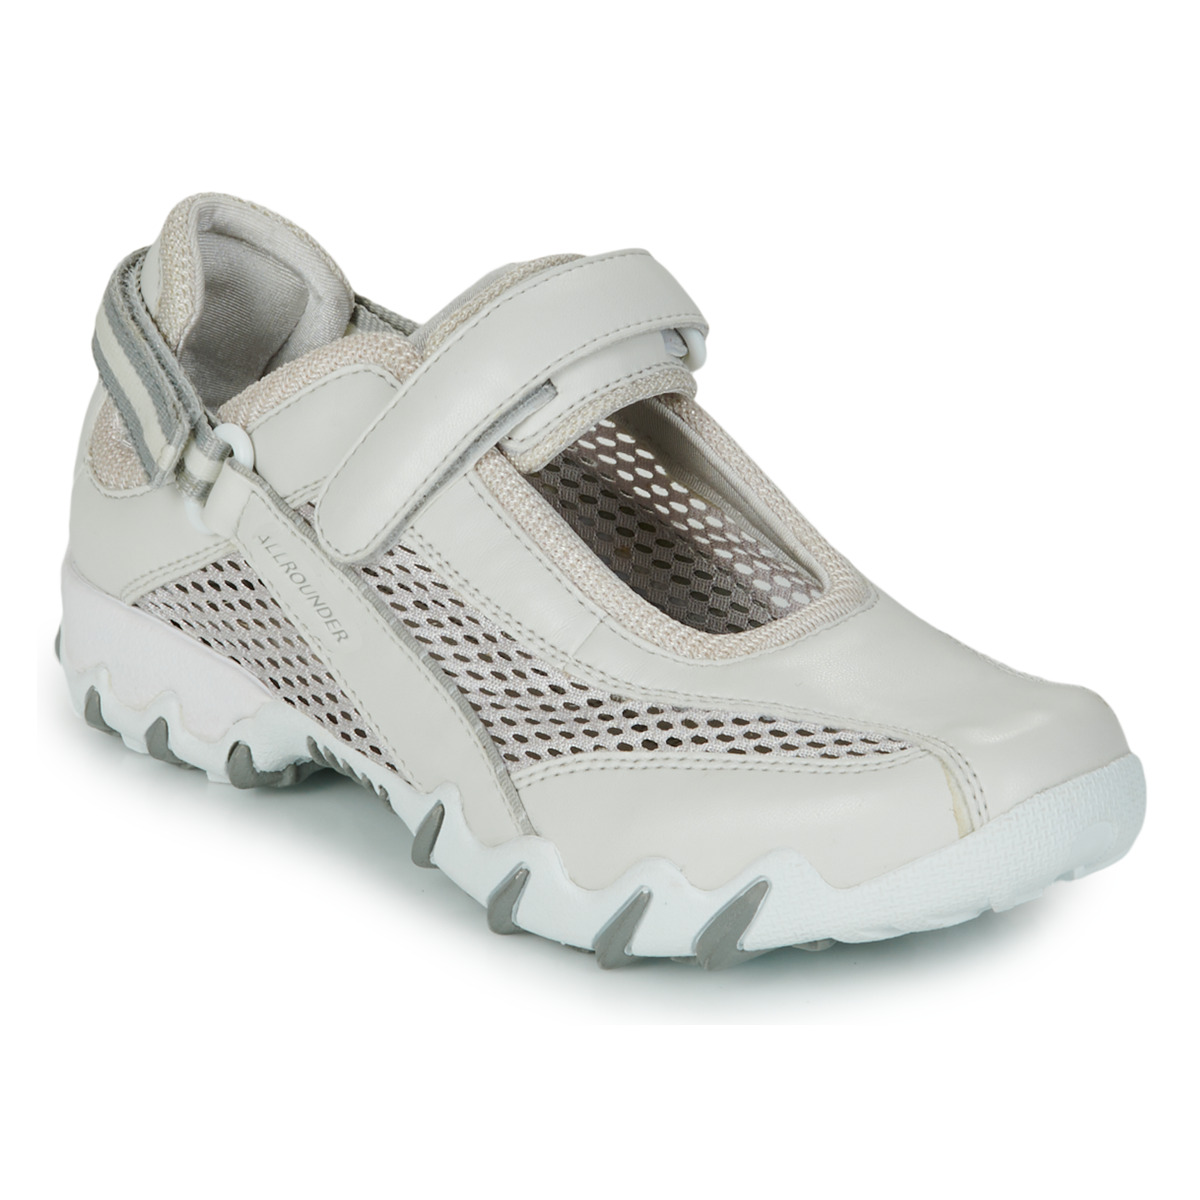 Shoes Women Sports sandals Allrounder by Mephisto NIRO White / Grey